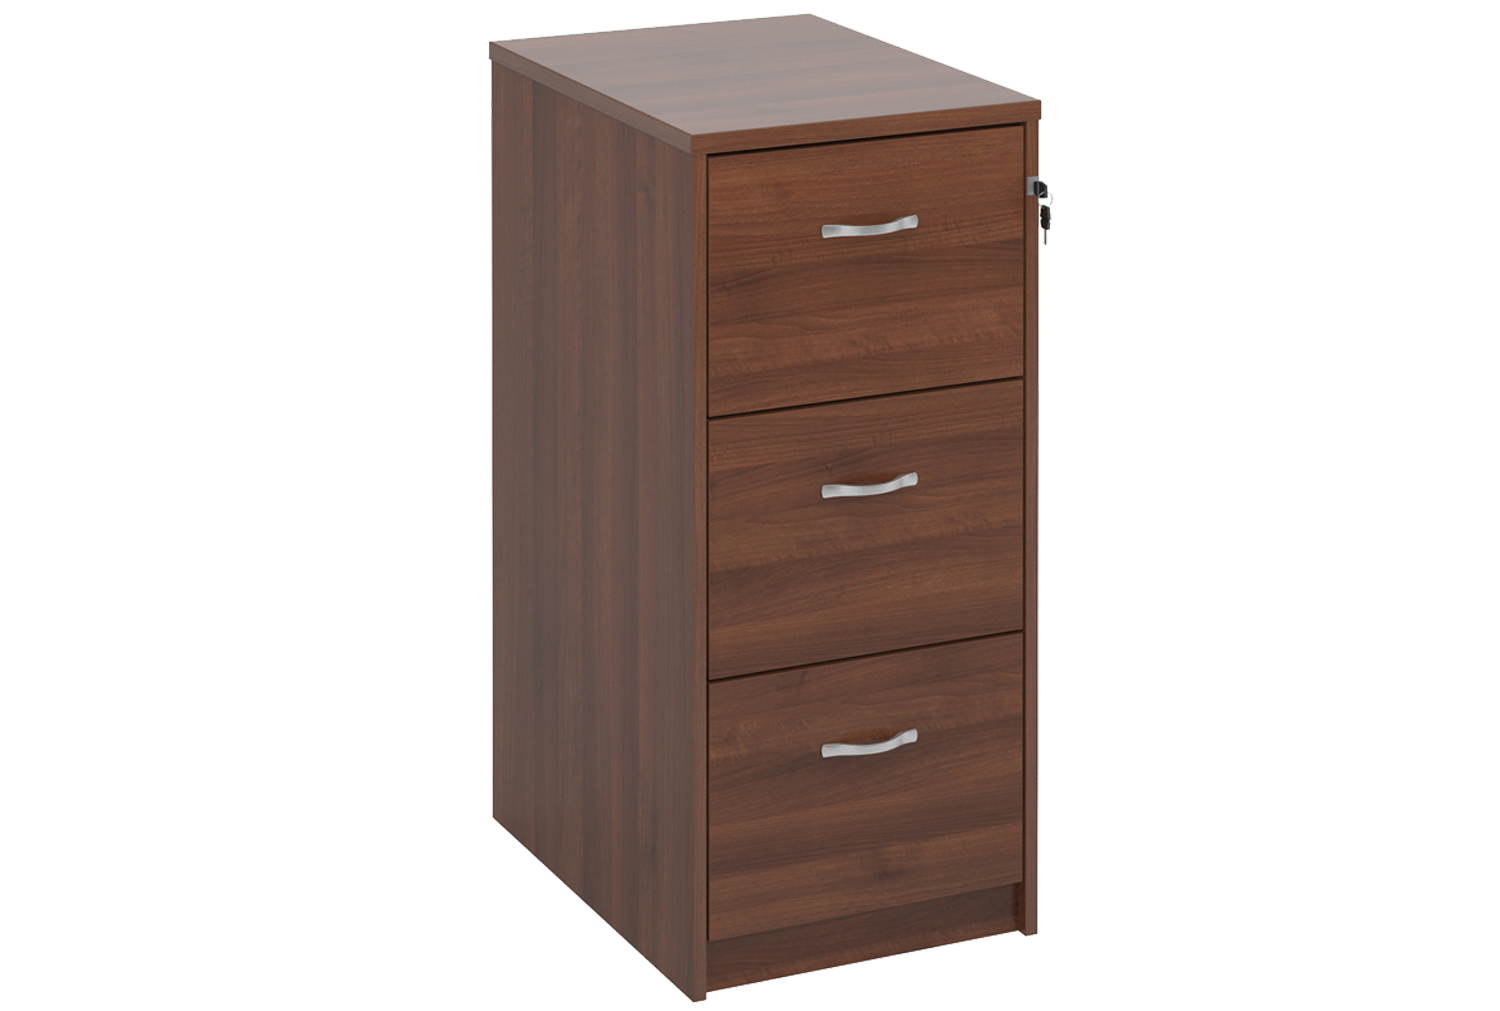 Tully Filing Cabinets, 3 Drawer - 48wx66dx105h (cm), Walnut